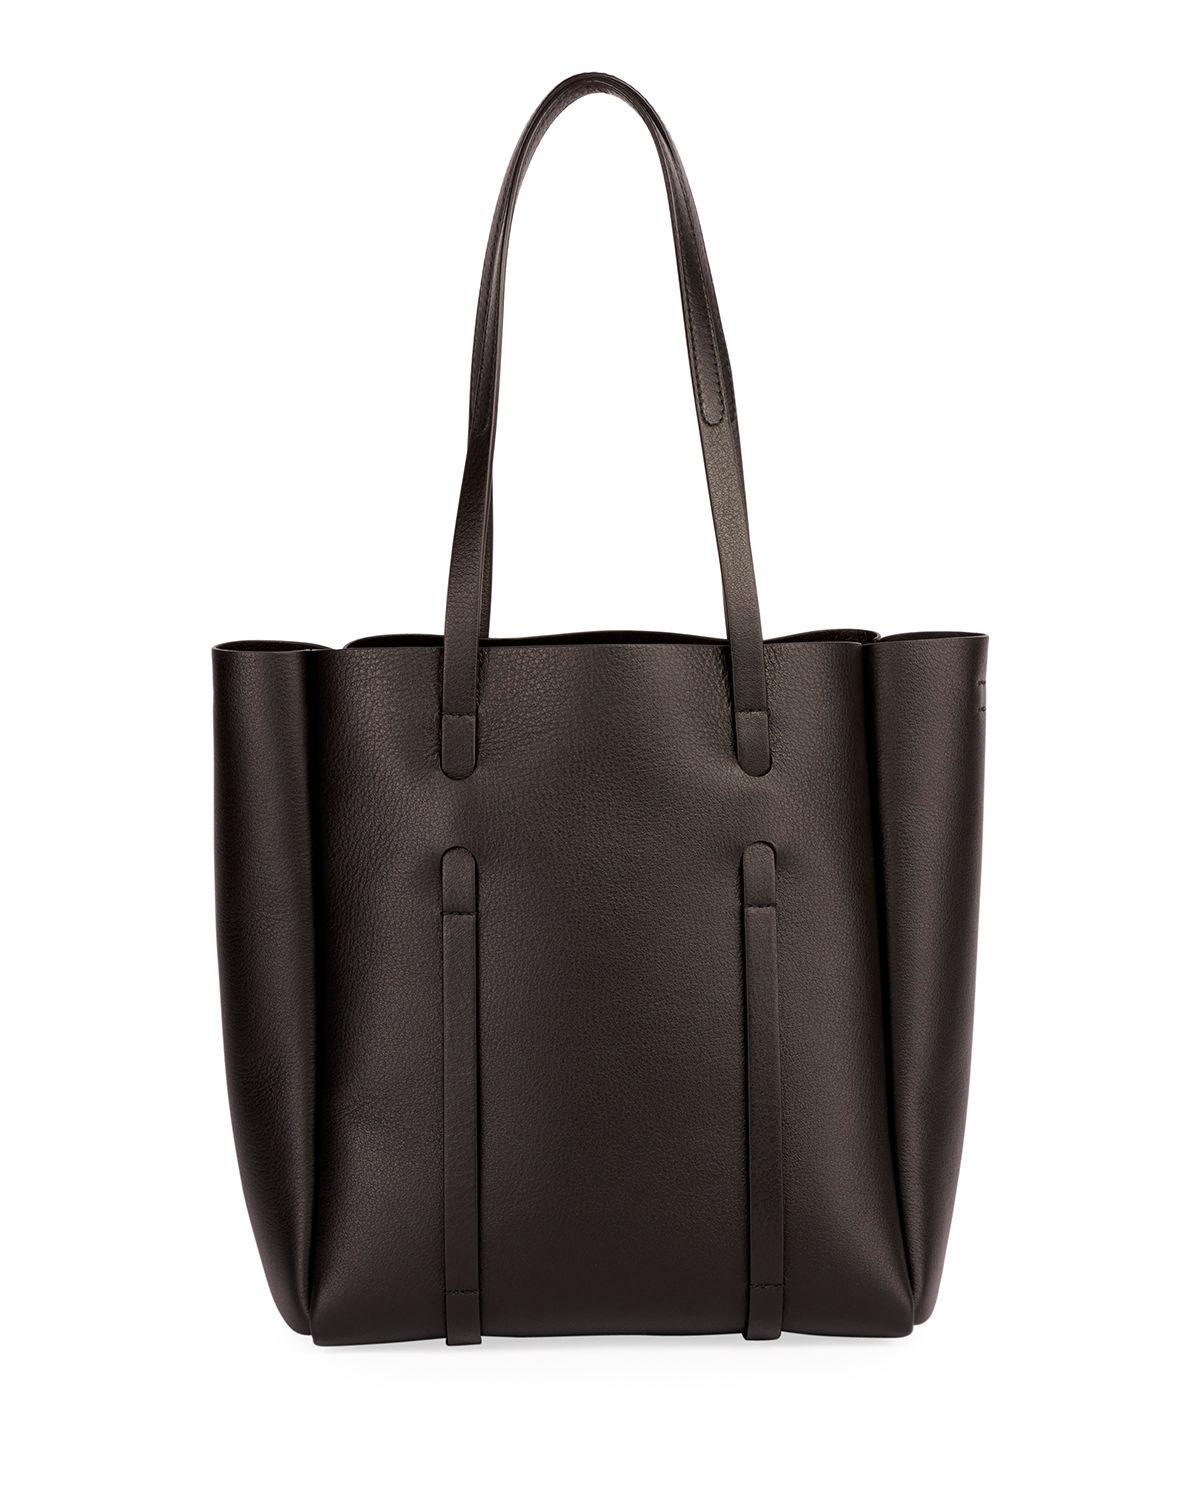 Balenciaga Everyday Small Leather Tote Bag in Black - Lyst